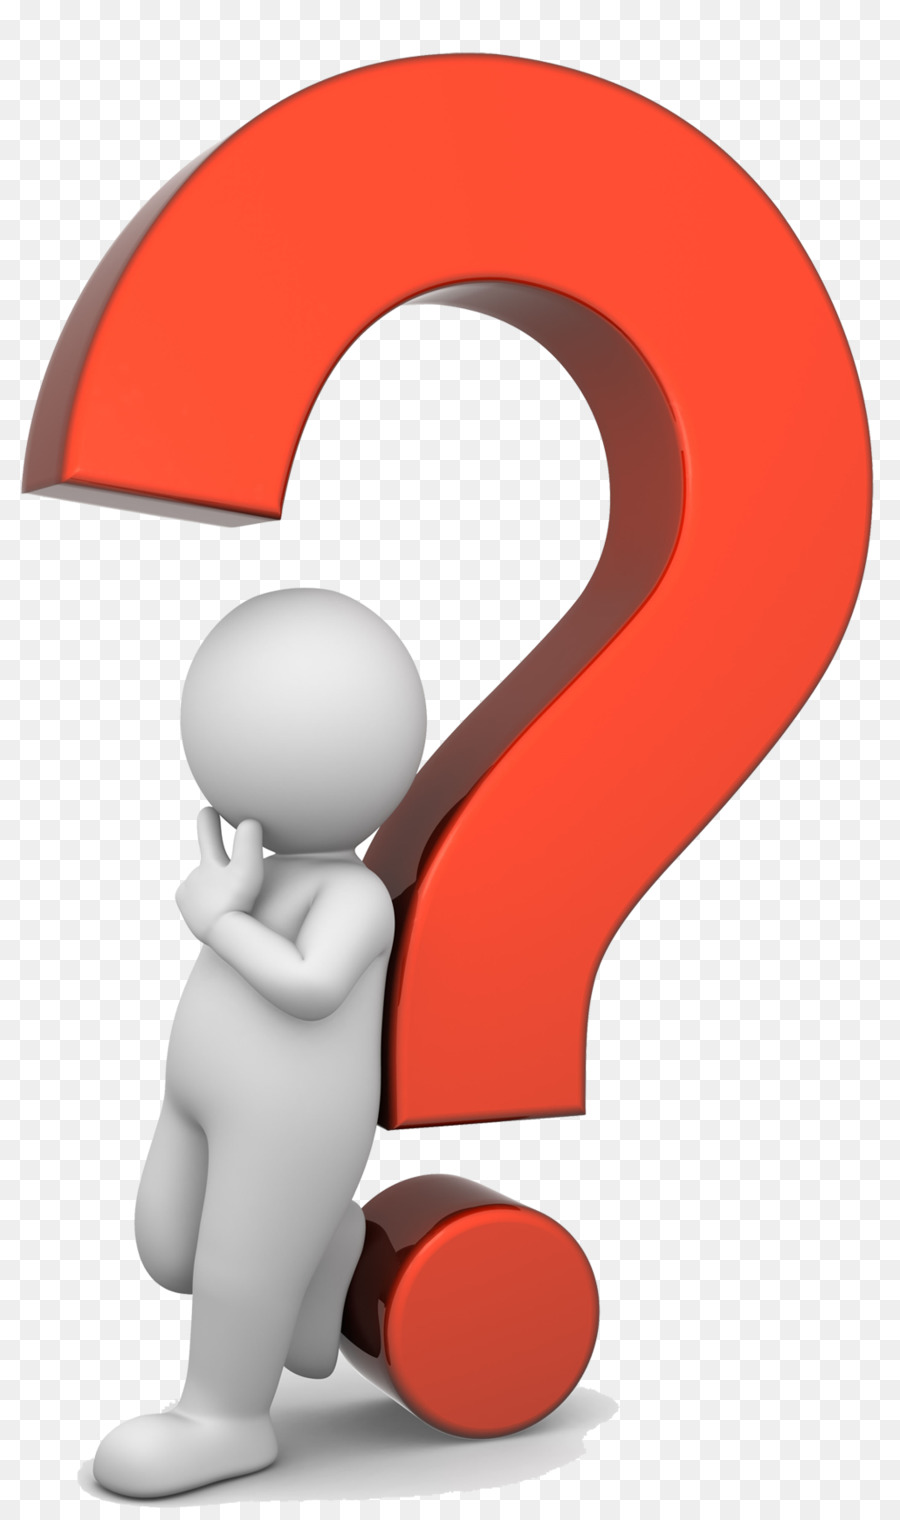 Animation Question mark Clip art - questions png download - 1031*1727 - Free Transparent Animation png Download.